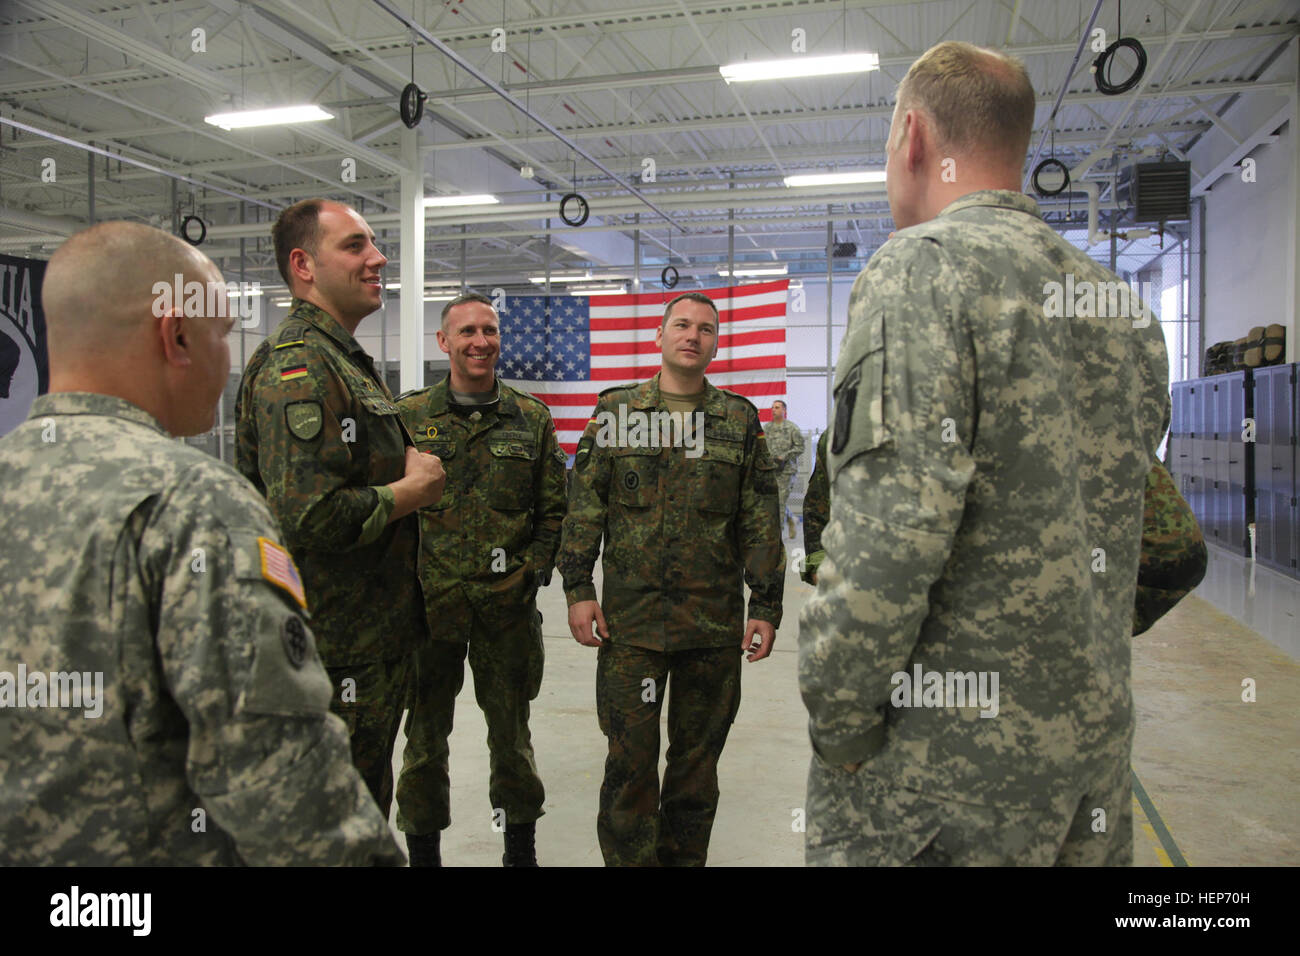 U.S. Army soldiers from the 982nd Combat Camera Company speak with German soldiers from the 26th Abu Brigade and Lufflandebrigade 26 at Dobbins Air Reserve Base, Ga., March 16, 2015. Operation Skyfall is a joint, multilateral combat camera subject matter expert exchange, hosted by the 982nd Combat Camera Company, which takes place at multiple locations in Georgia. Operation Skyfall is an event which focuses on interoperability of combat camera training and capturing airborne operations with three partner nations and multi-service units. (U.S. Army photo by Spc. Kelson Brooks / Released) Operat Stock Photo